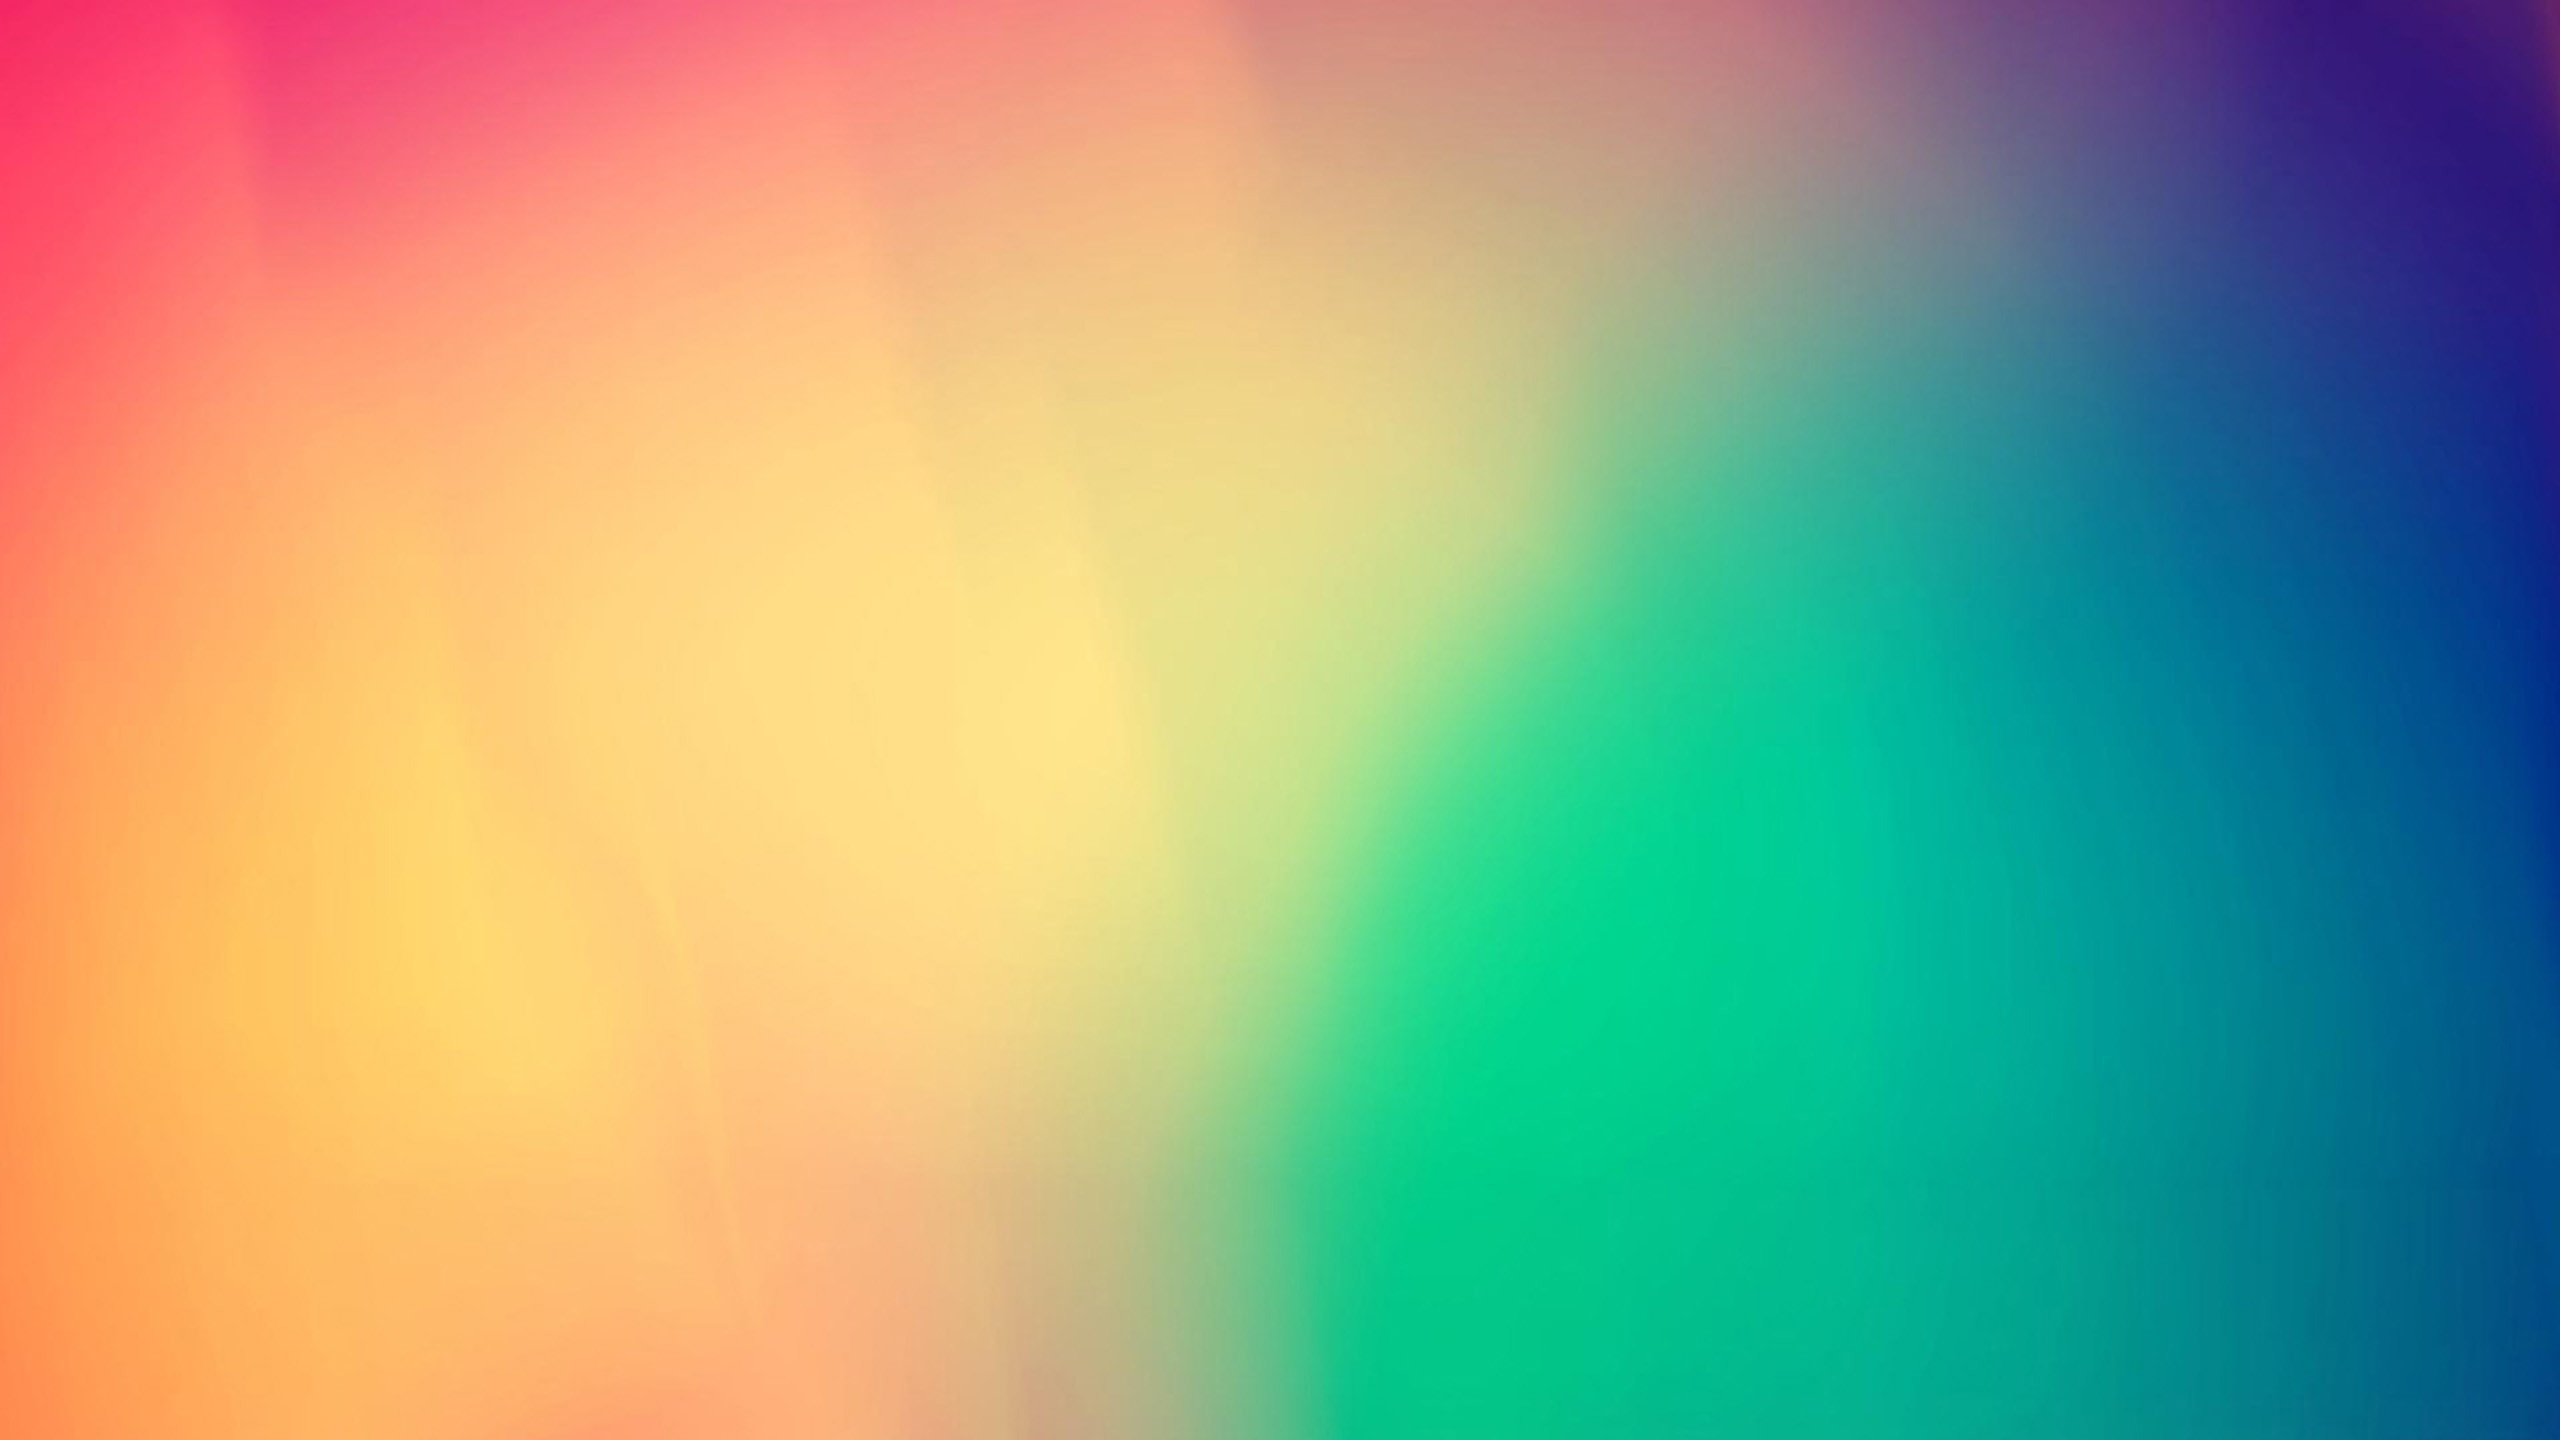 2560x1440 Download Solid Color Backgrounds.